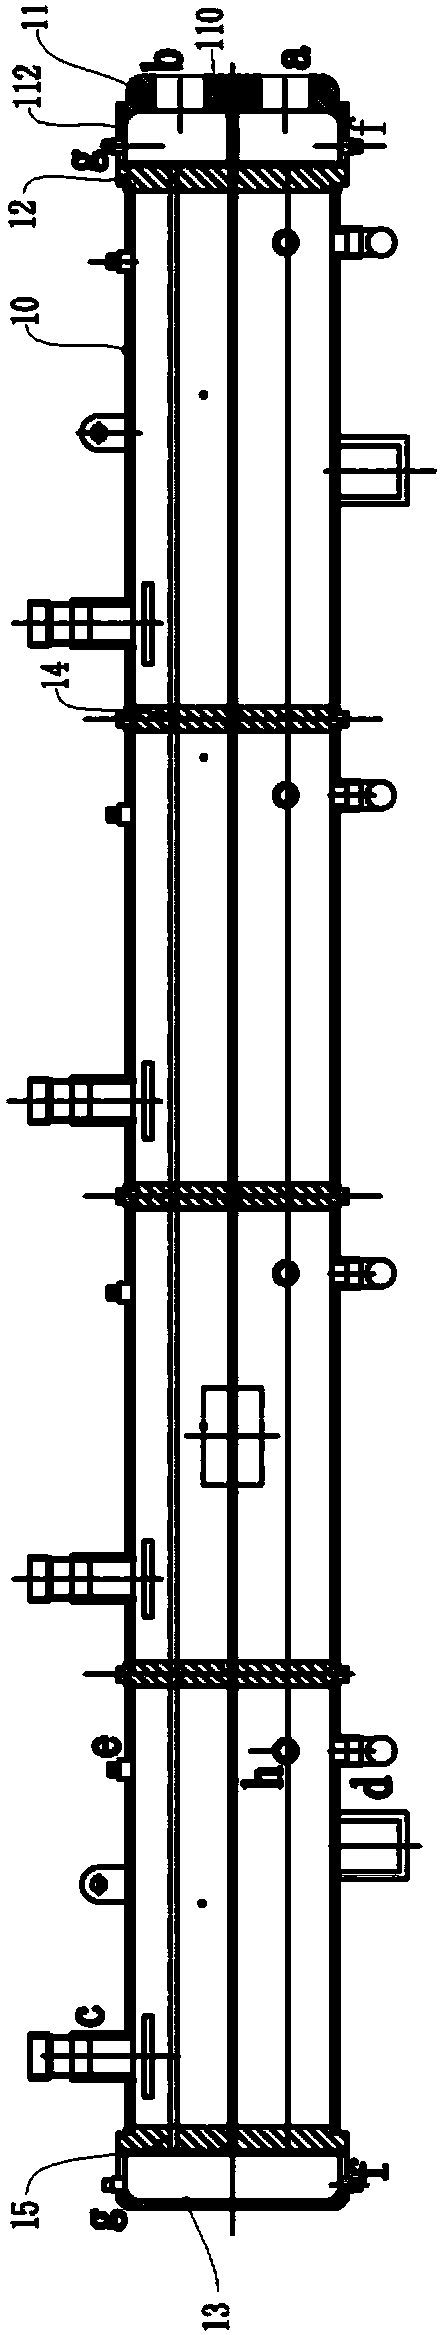 Refrigeration evaporator with multiple outer shell sections and single space plates